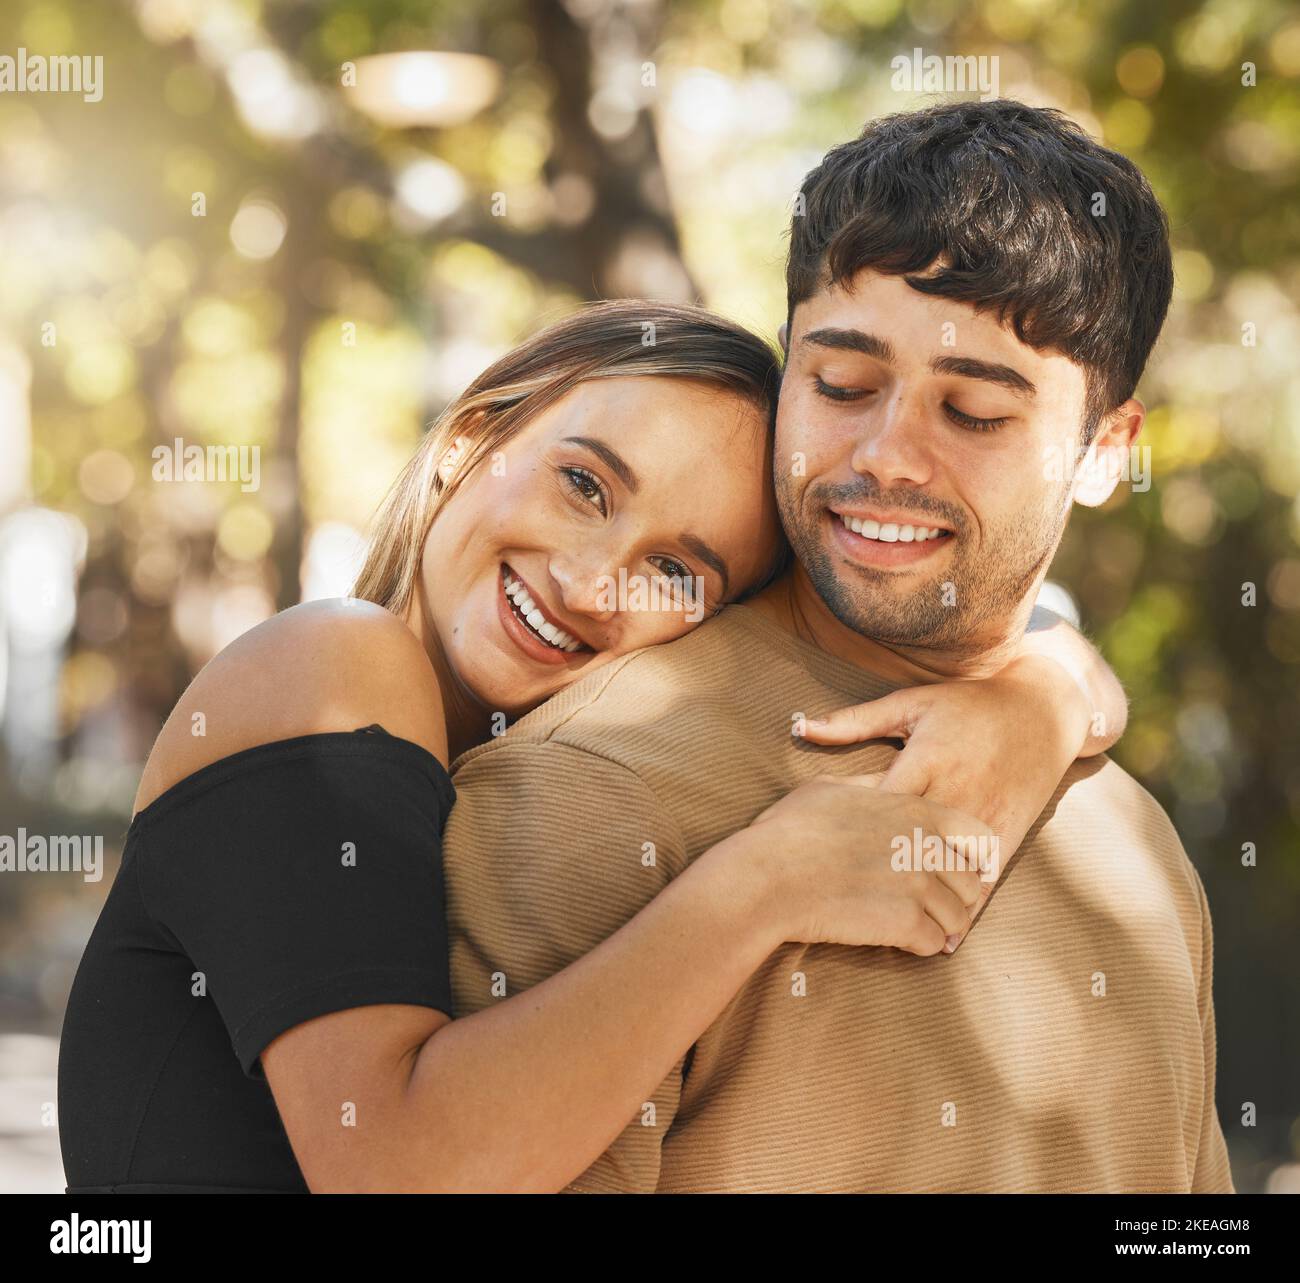 Love Couple And Hug Being Happy Smile And Romantic For Relationship Bonding And Outdoor